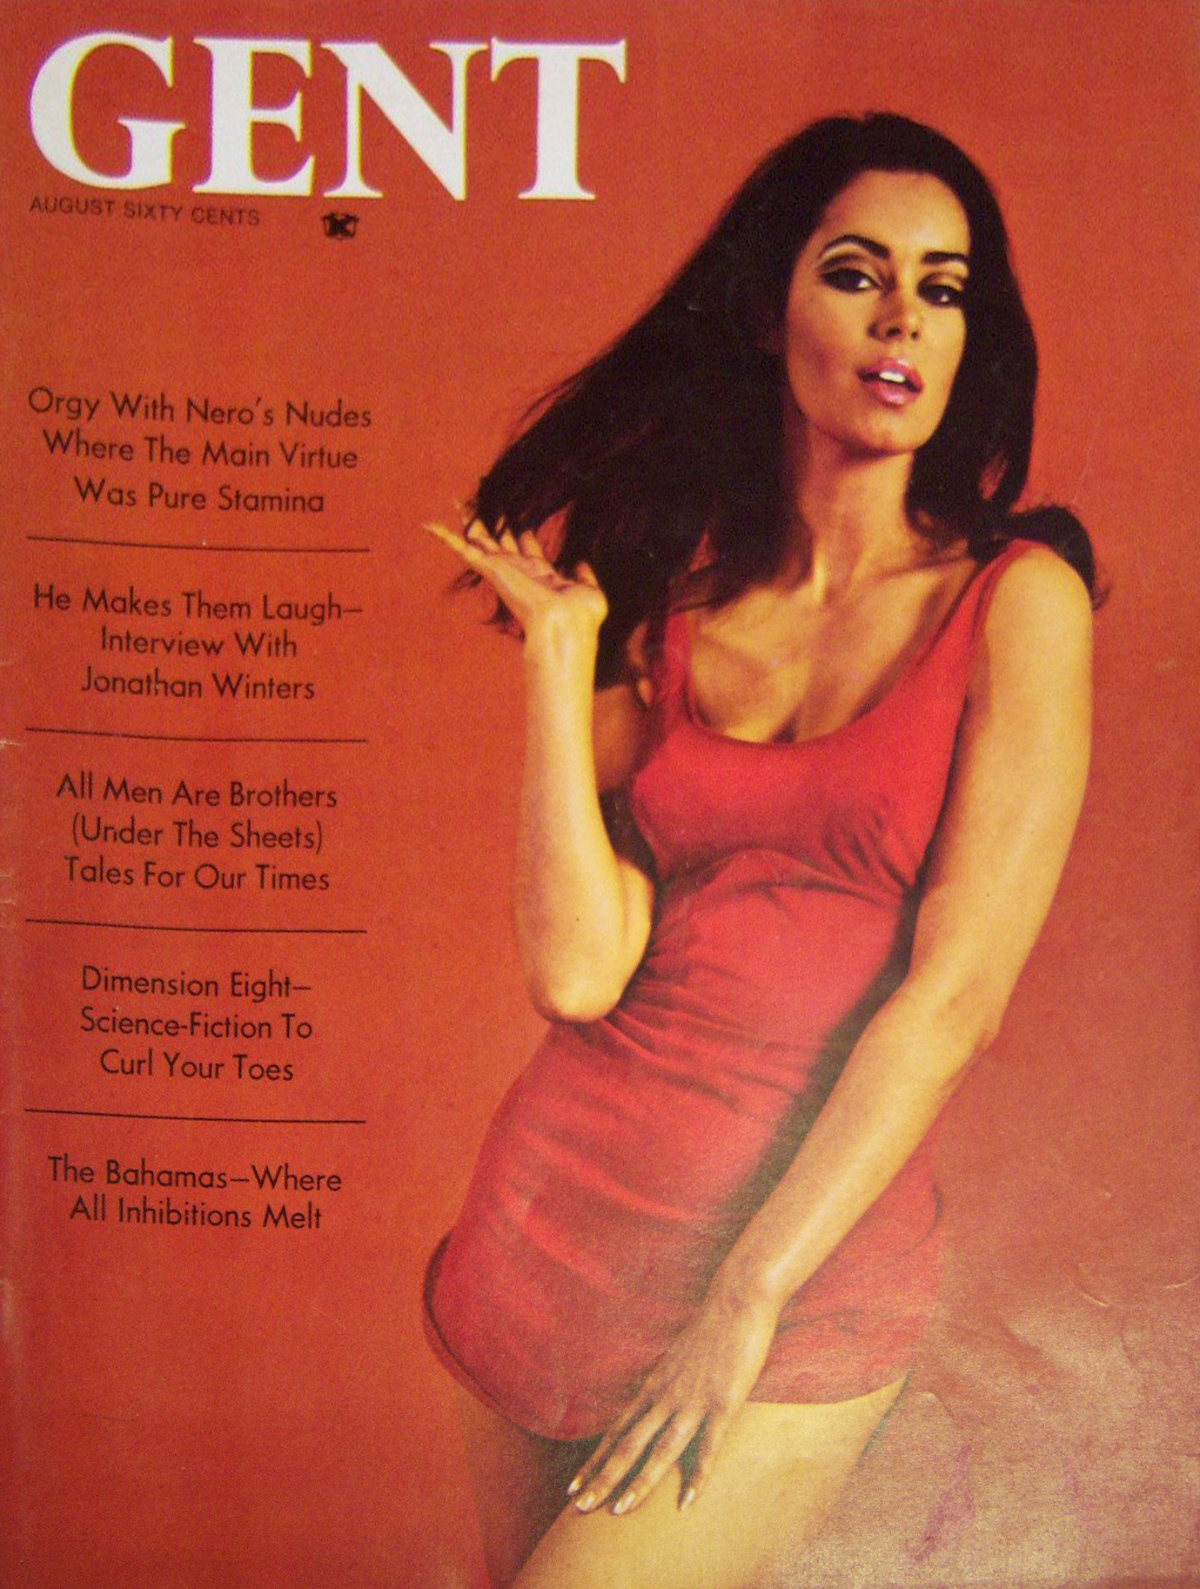 Gent August 1968 magazine back issue Gent magizine back copy Gent August 1968 Adult Vintage Magazine Back Issue Featuring Large Breasted Nude Women. Orgy With Nero's Nudes Where The Main Virtue Was Pure Stamina.